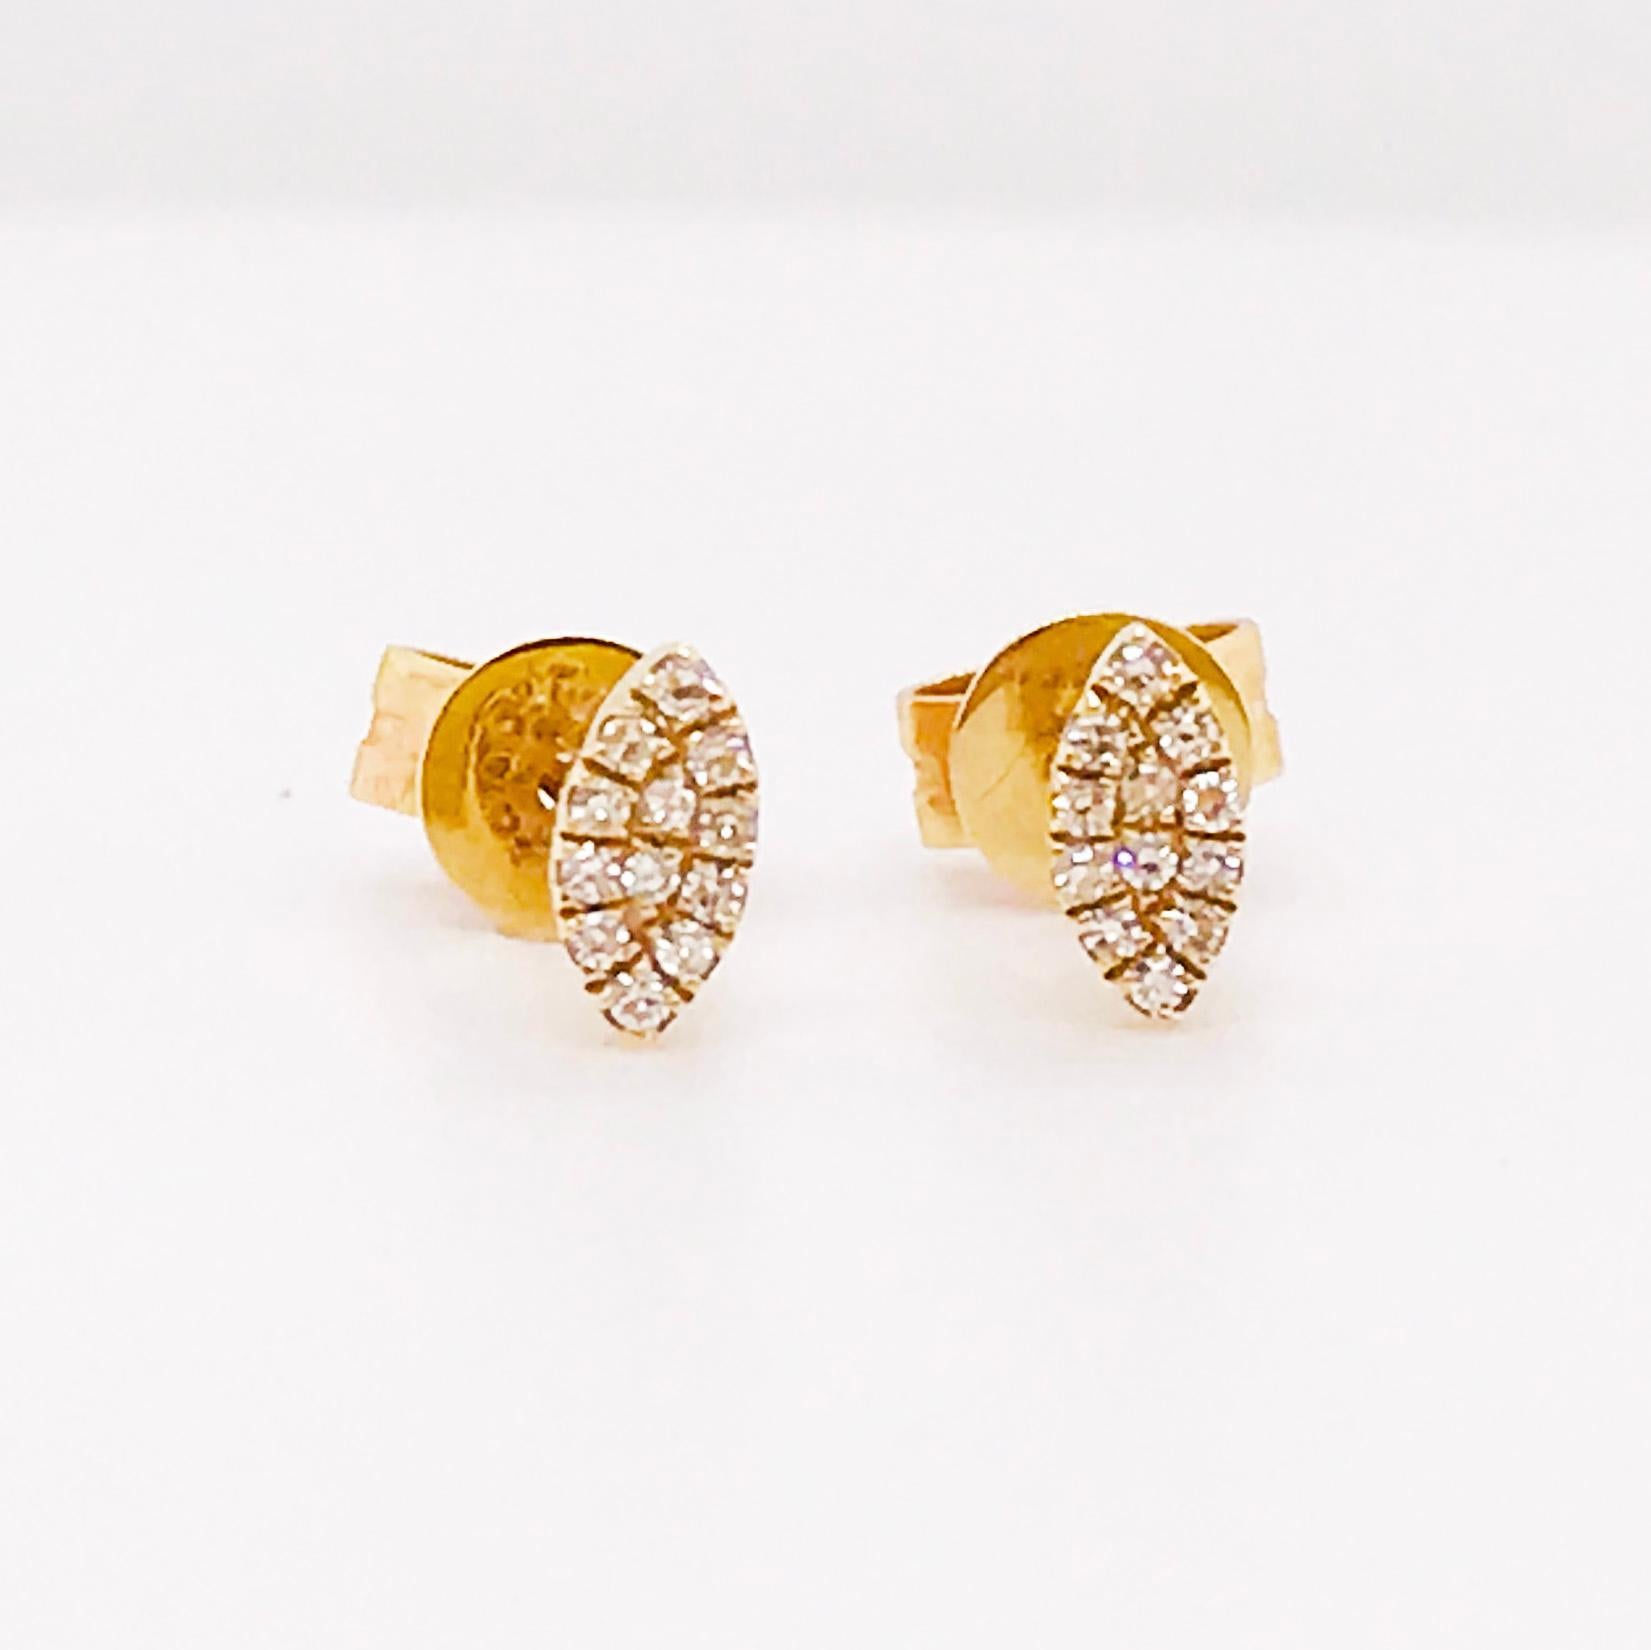 These little marquise studs are perfect tiny earrings for your ears. Wear them any day and every day in whatever piercing you want! A total of 0.08 carats of diamonds are studded across the low profile tops. These are the perfect dainty touch to